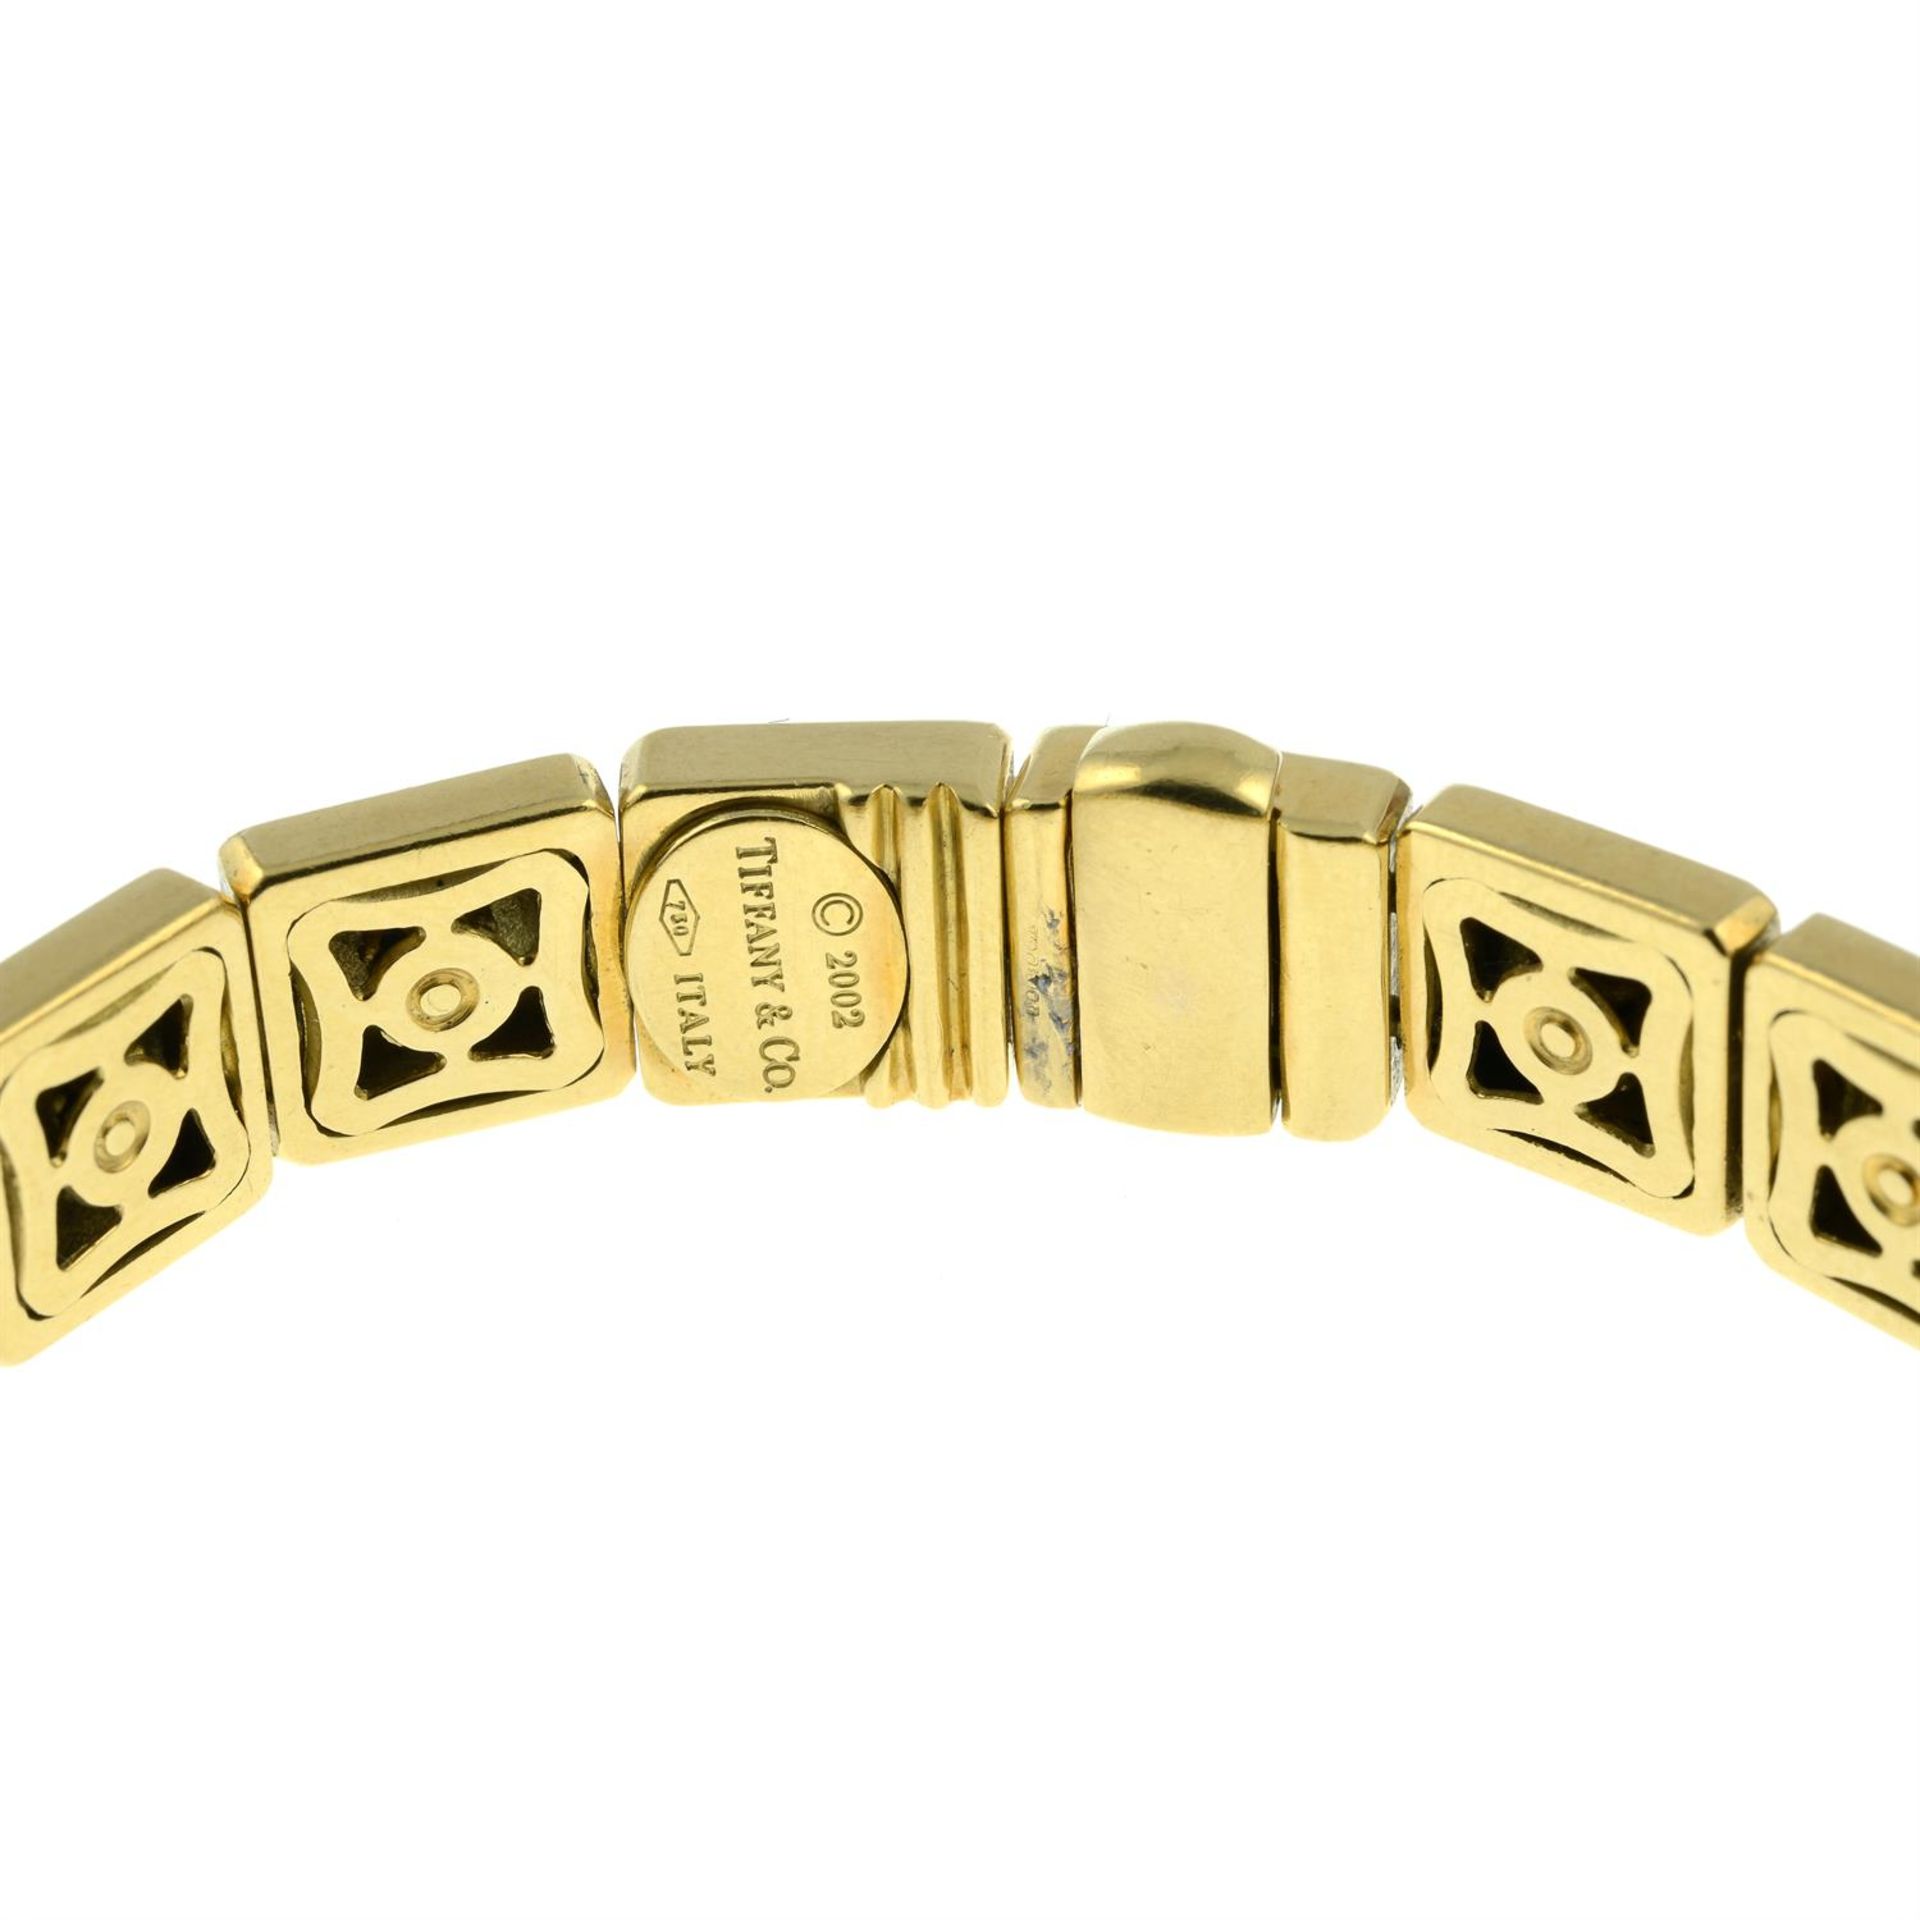 An 18ct gold square tile-link bracelet, by Tiffany and Co. - Image 3 of 5